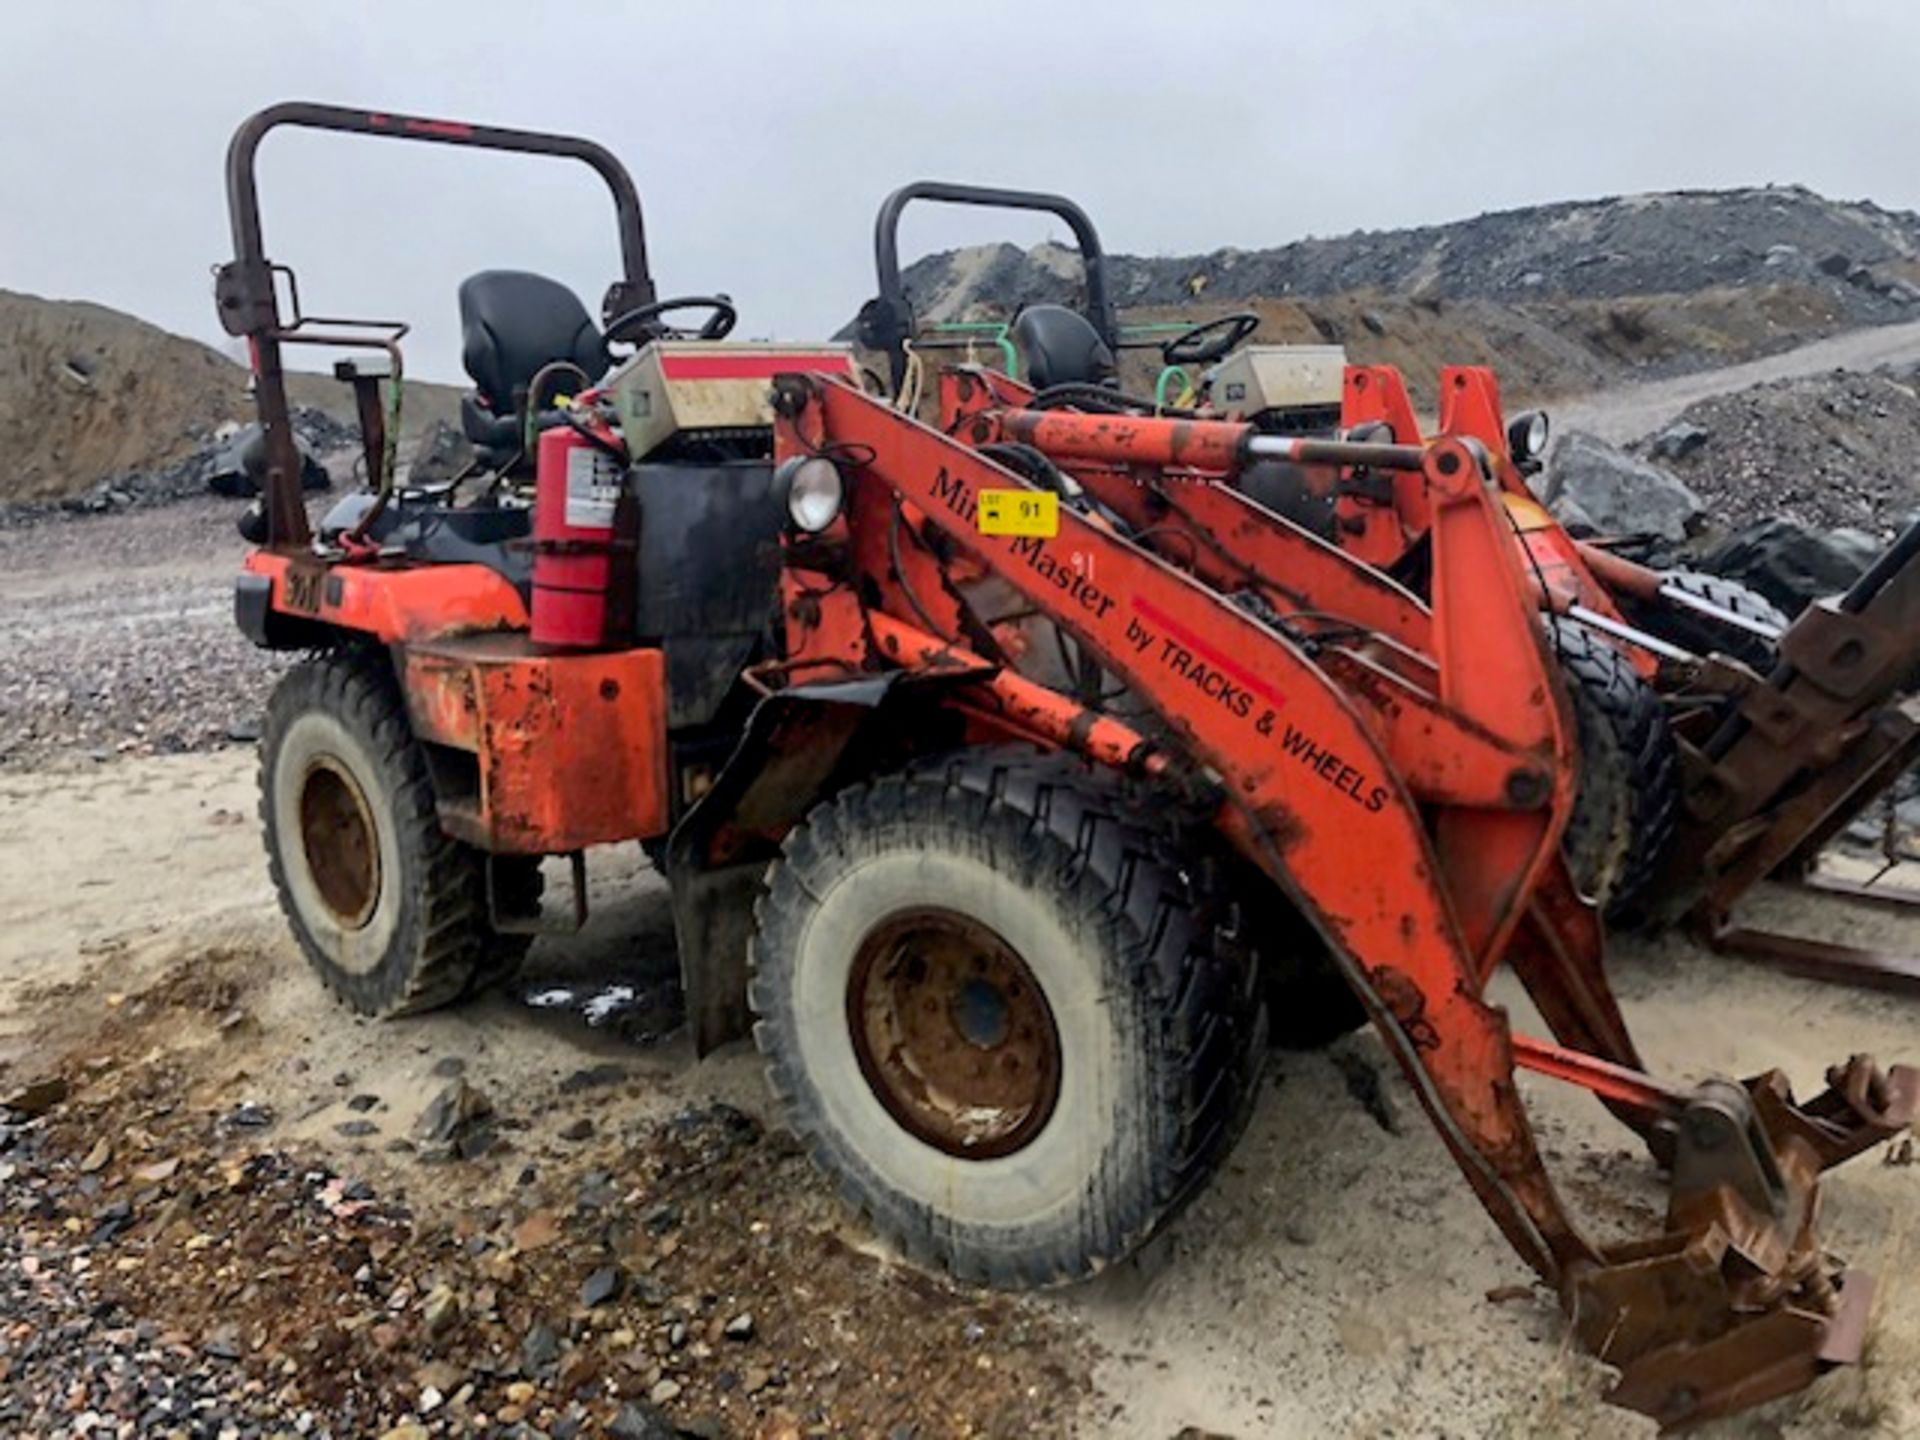 KUBOTA MINE MASTER R520S-LBH MINING FRONT END LOADER S/N: 11501 / 501 (LOCATED AT GARSON)